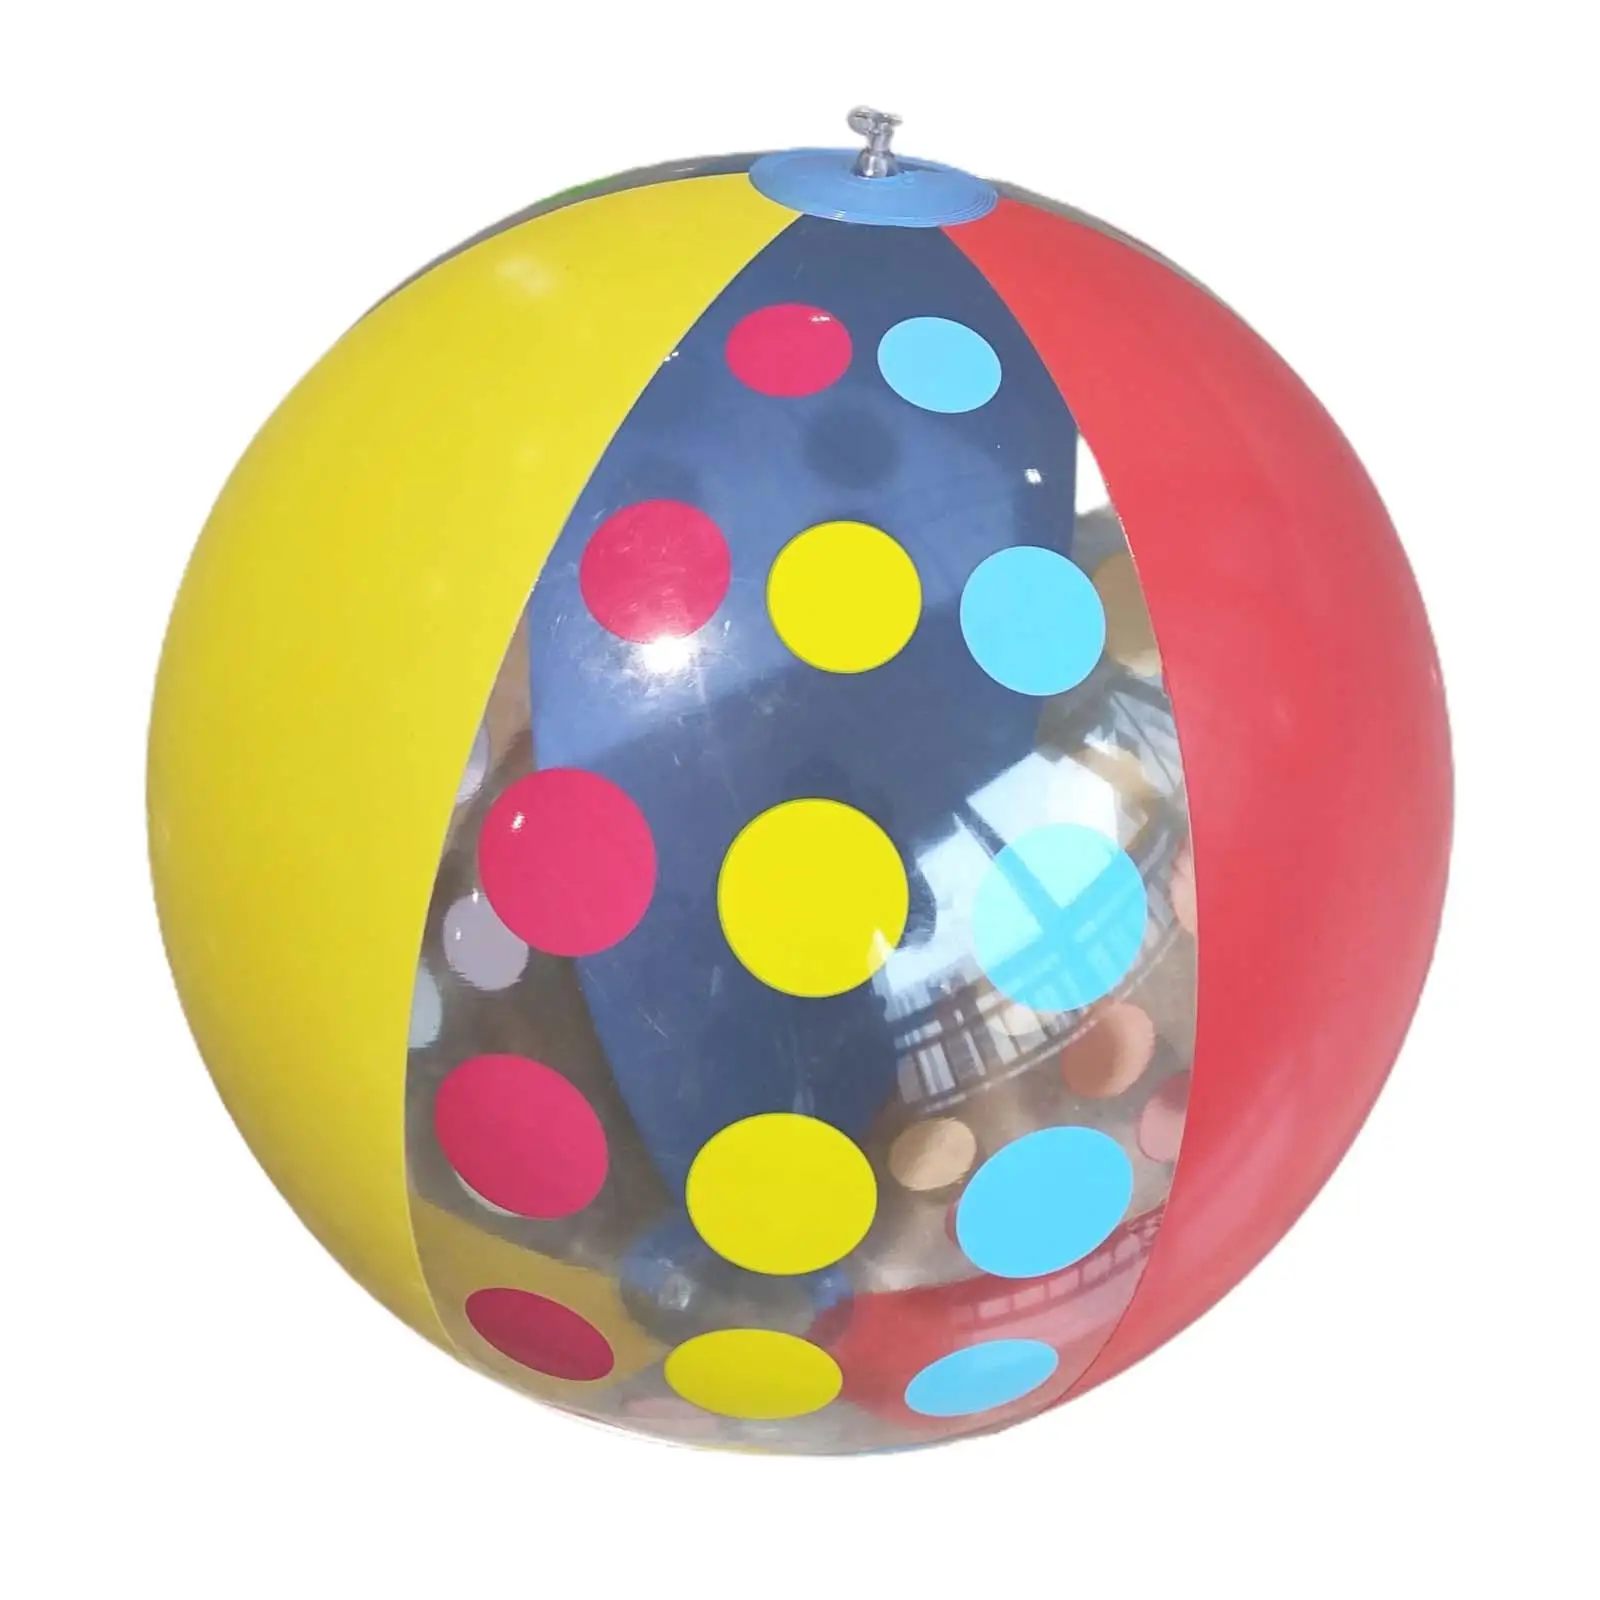 Swimming Pool Balls Multipurpose Pool Party Favor Inflatable Pool Toys Blow Balls for Pool Summer Beach Holiday Party